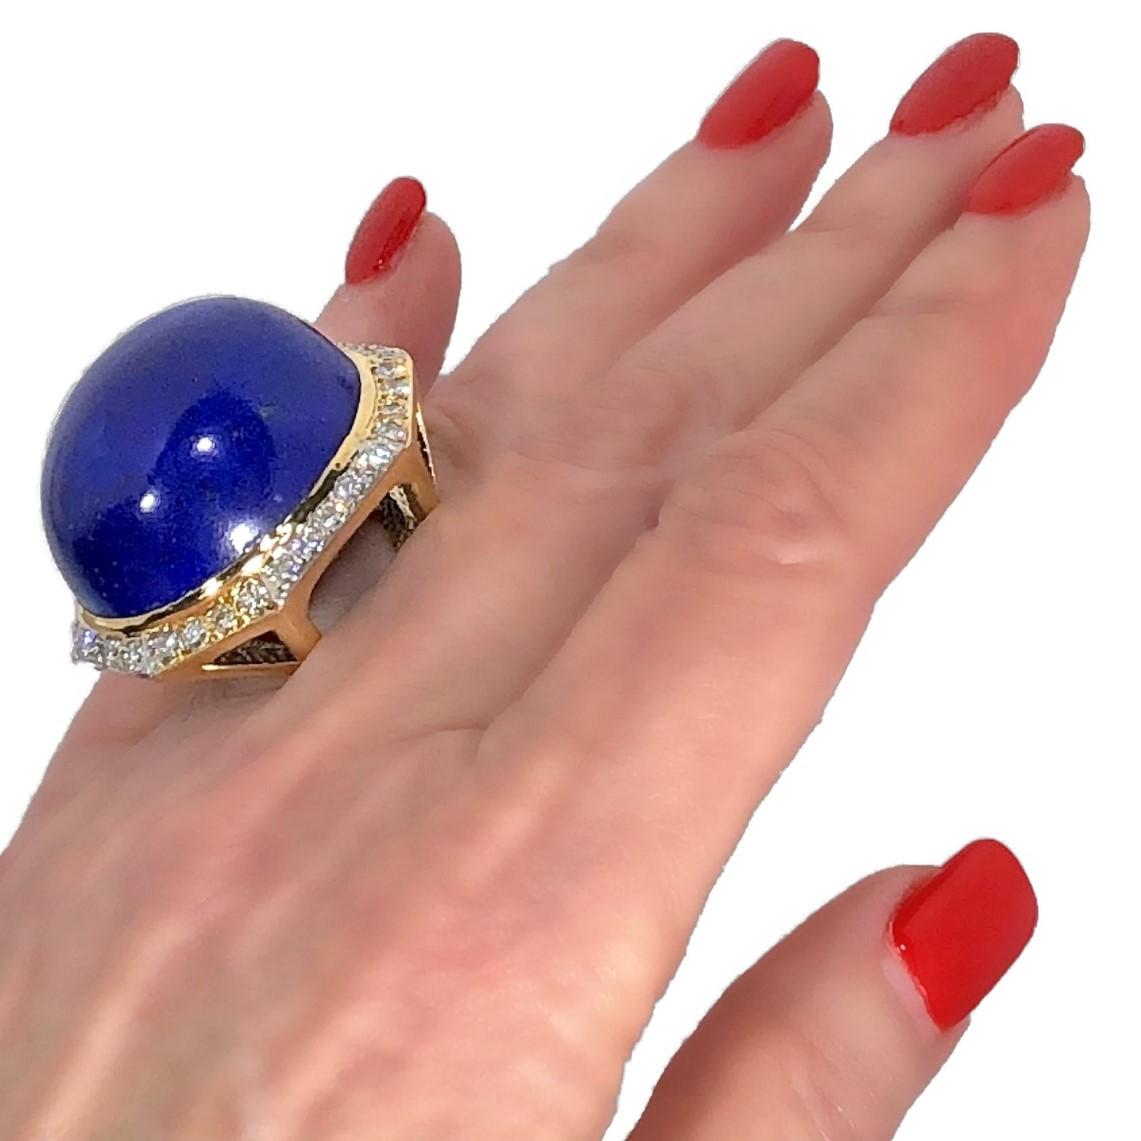 Massive Gold Cocktail Ring with 86 Carat Lapis-Lazuli Cabochon and Diamonds 8